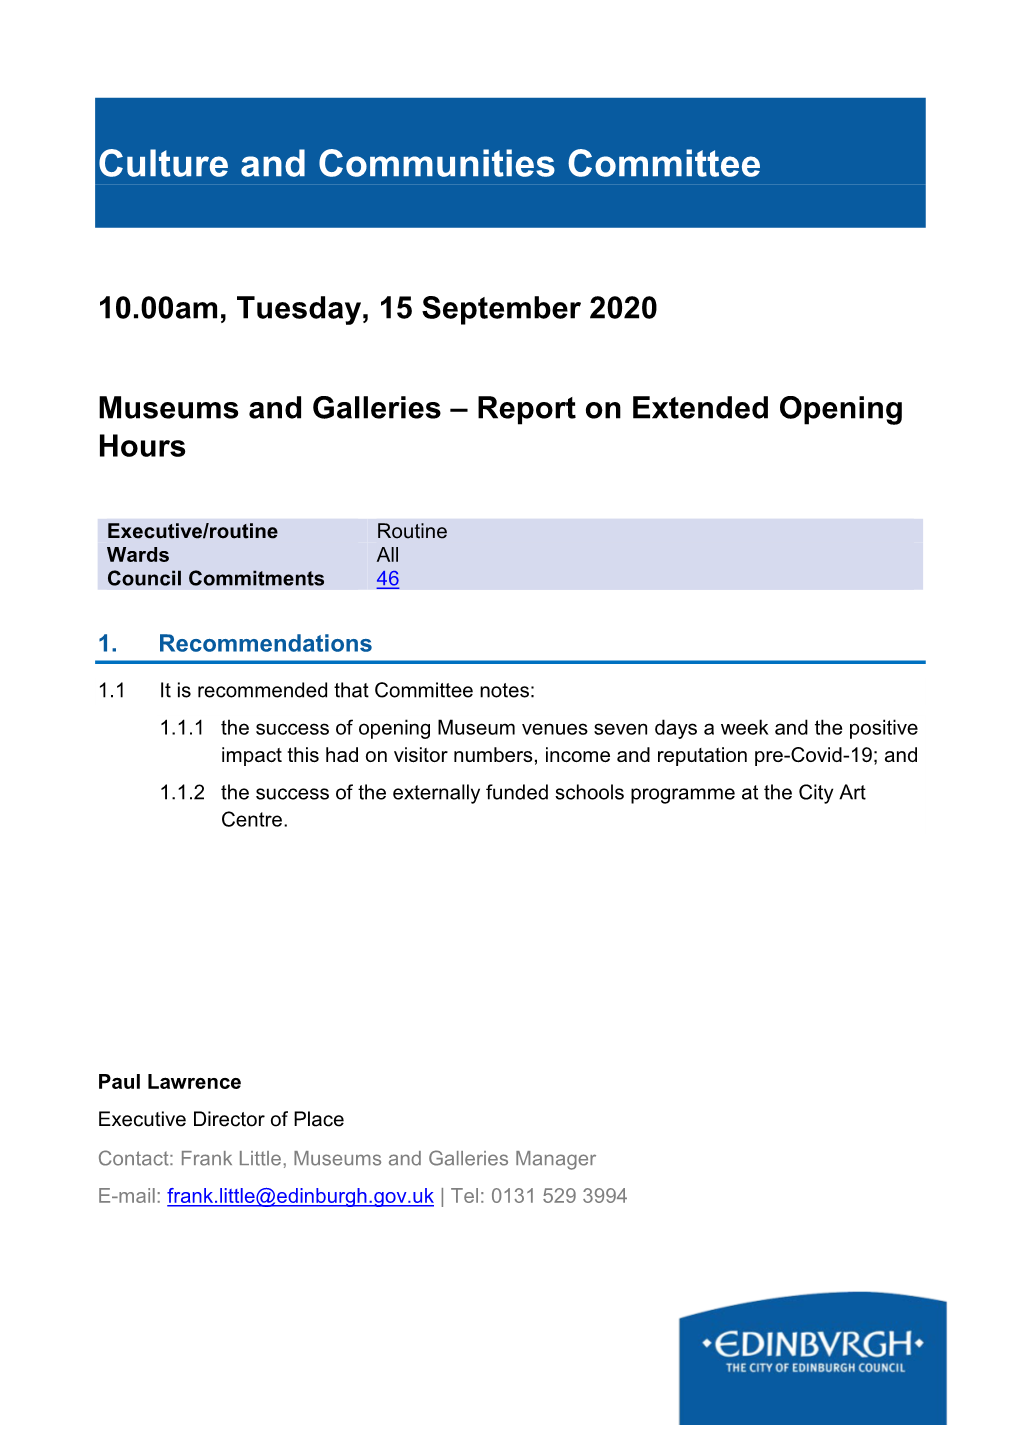 Museums and Galleries – Report on Extended Opening Hours PDF 217